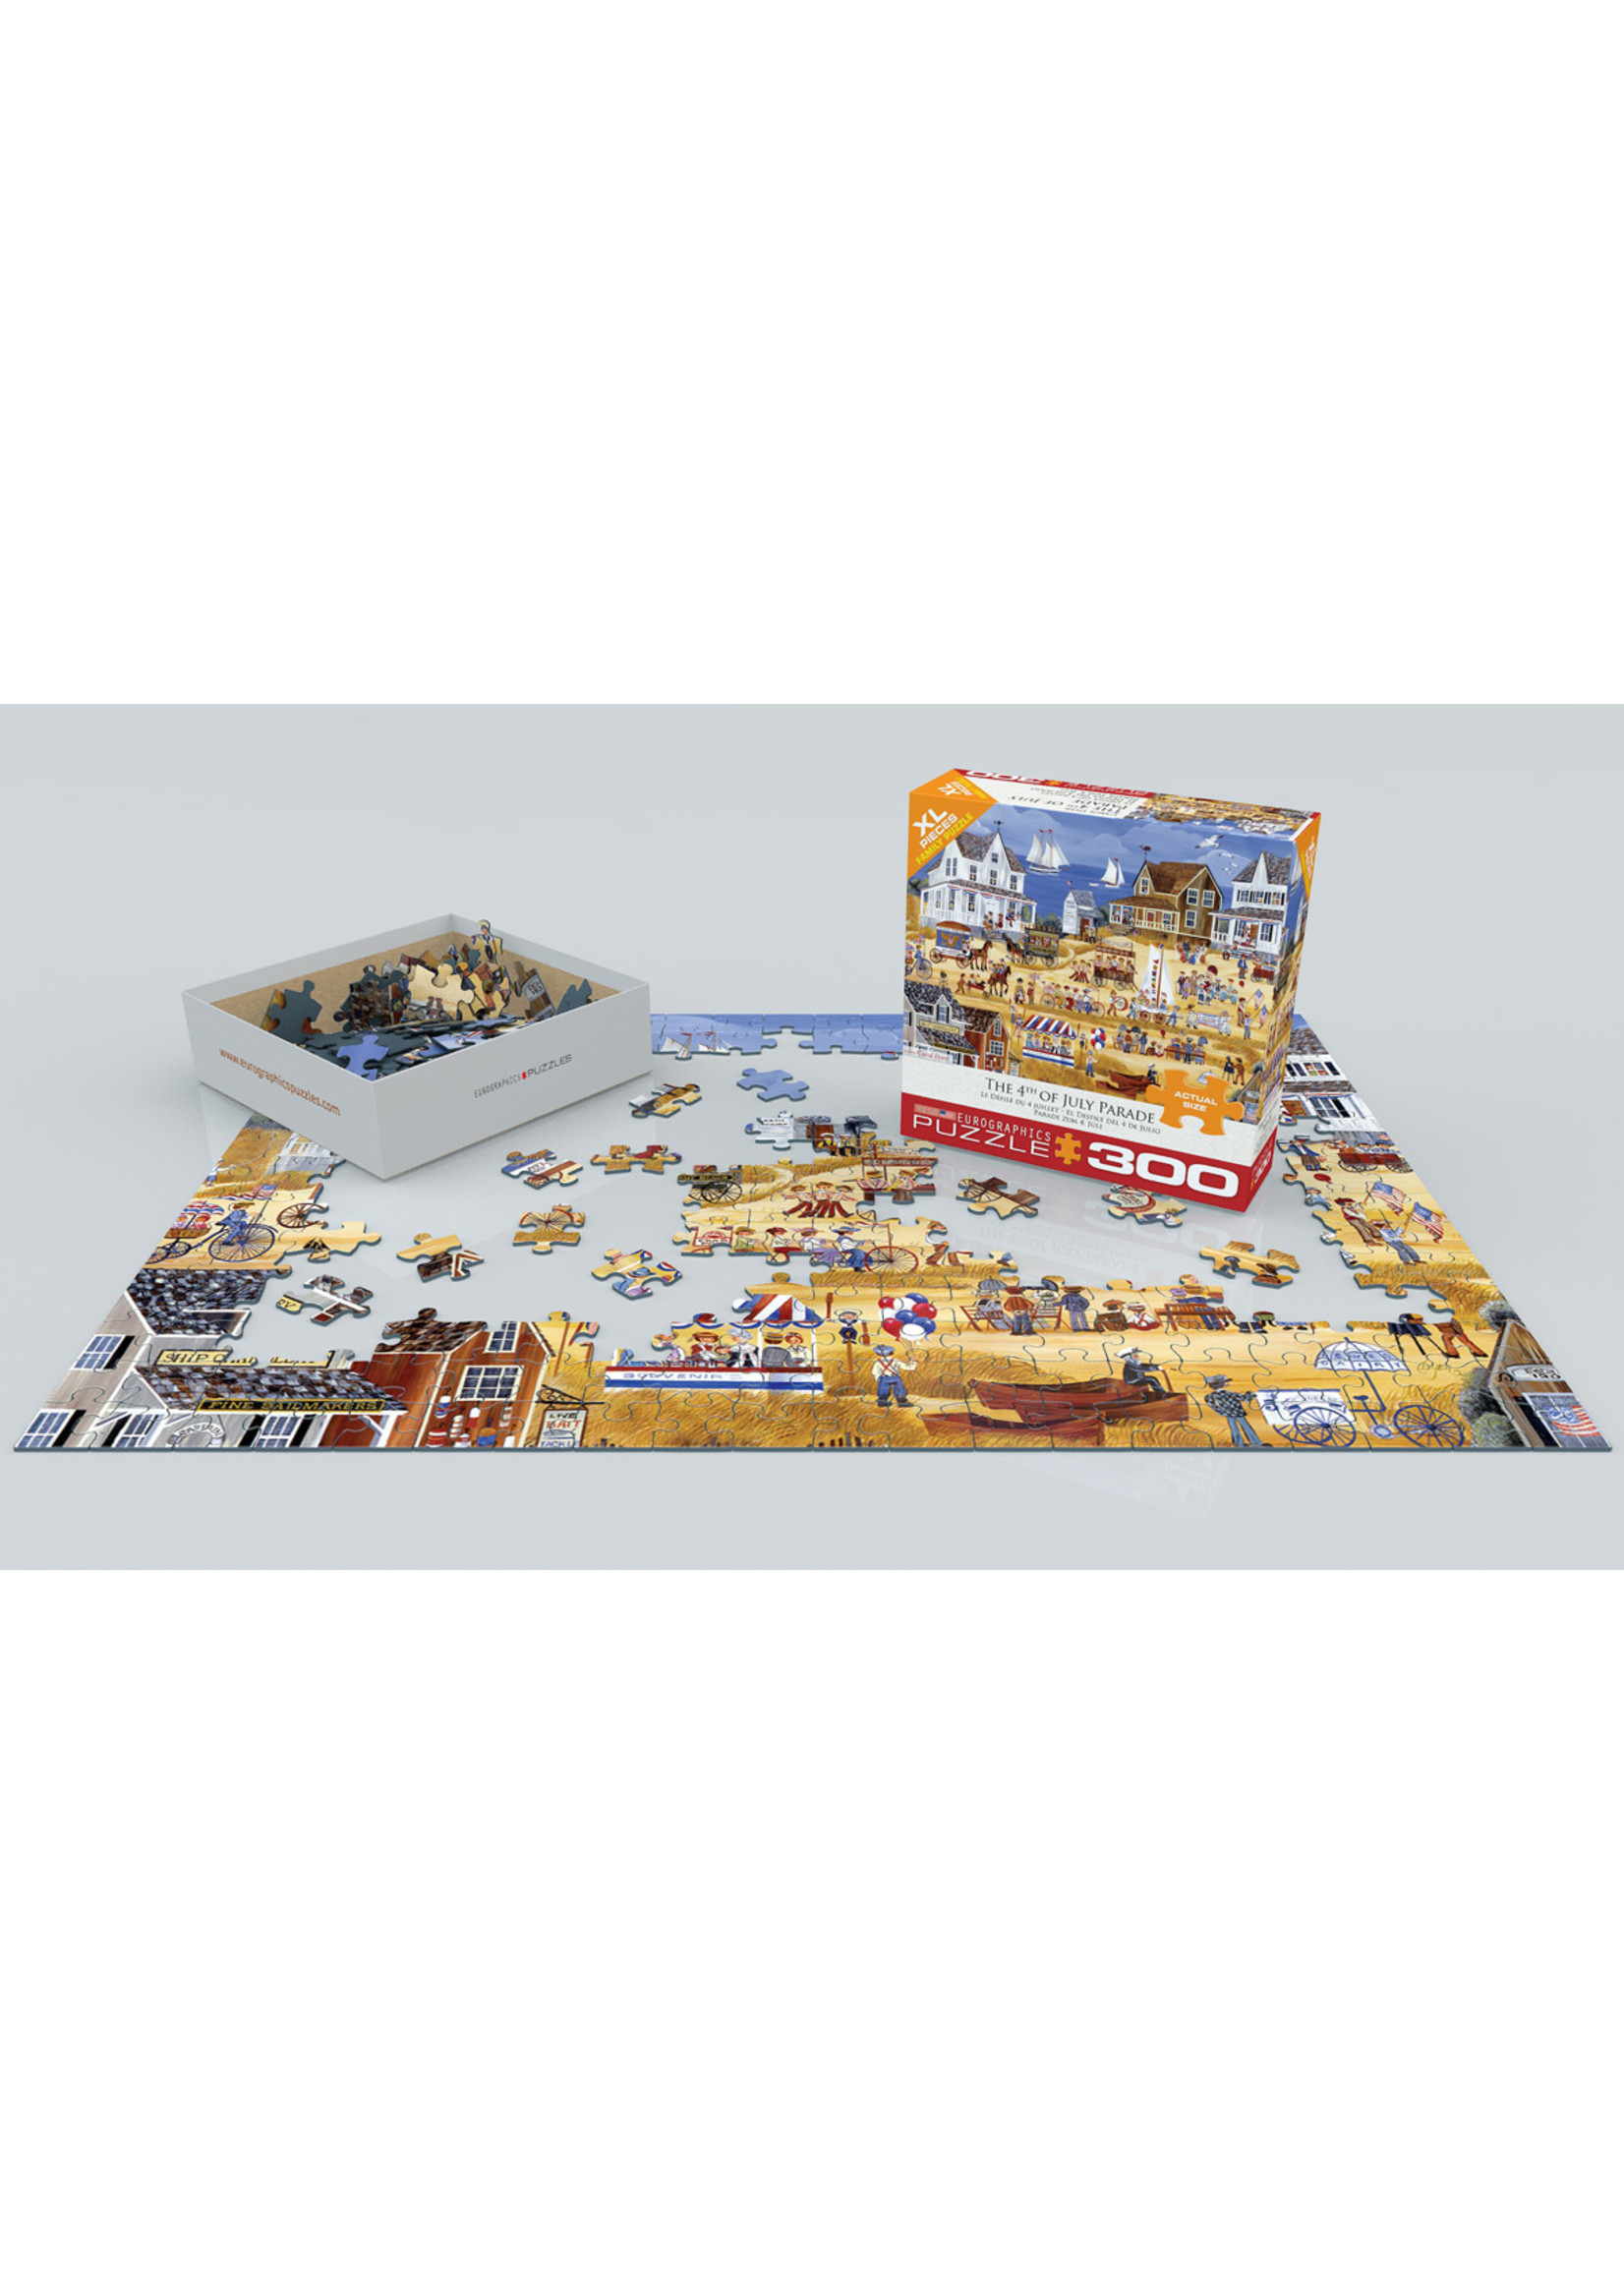 Eurographics "4th of July Parade" 300 Piece Puzzle